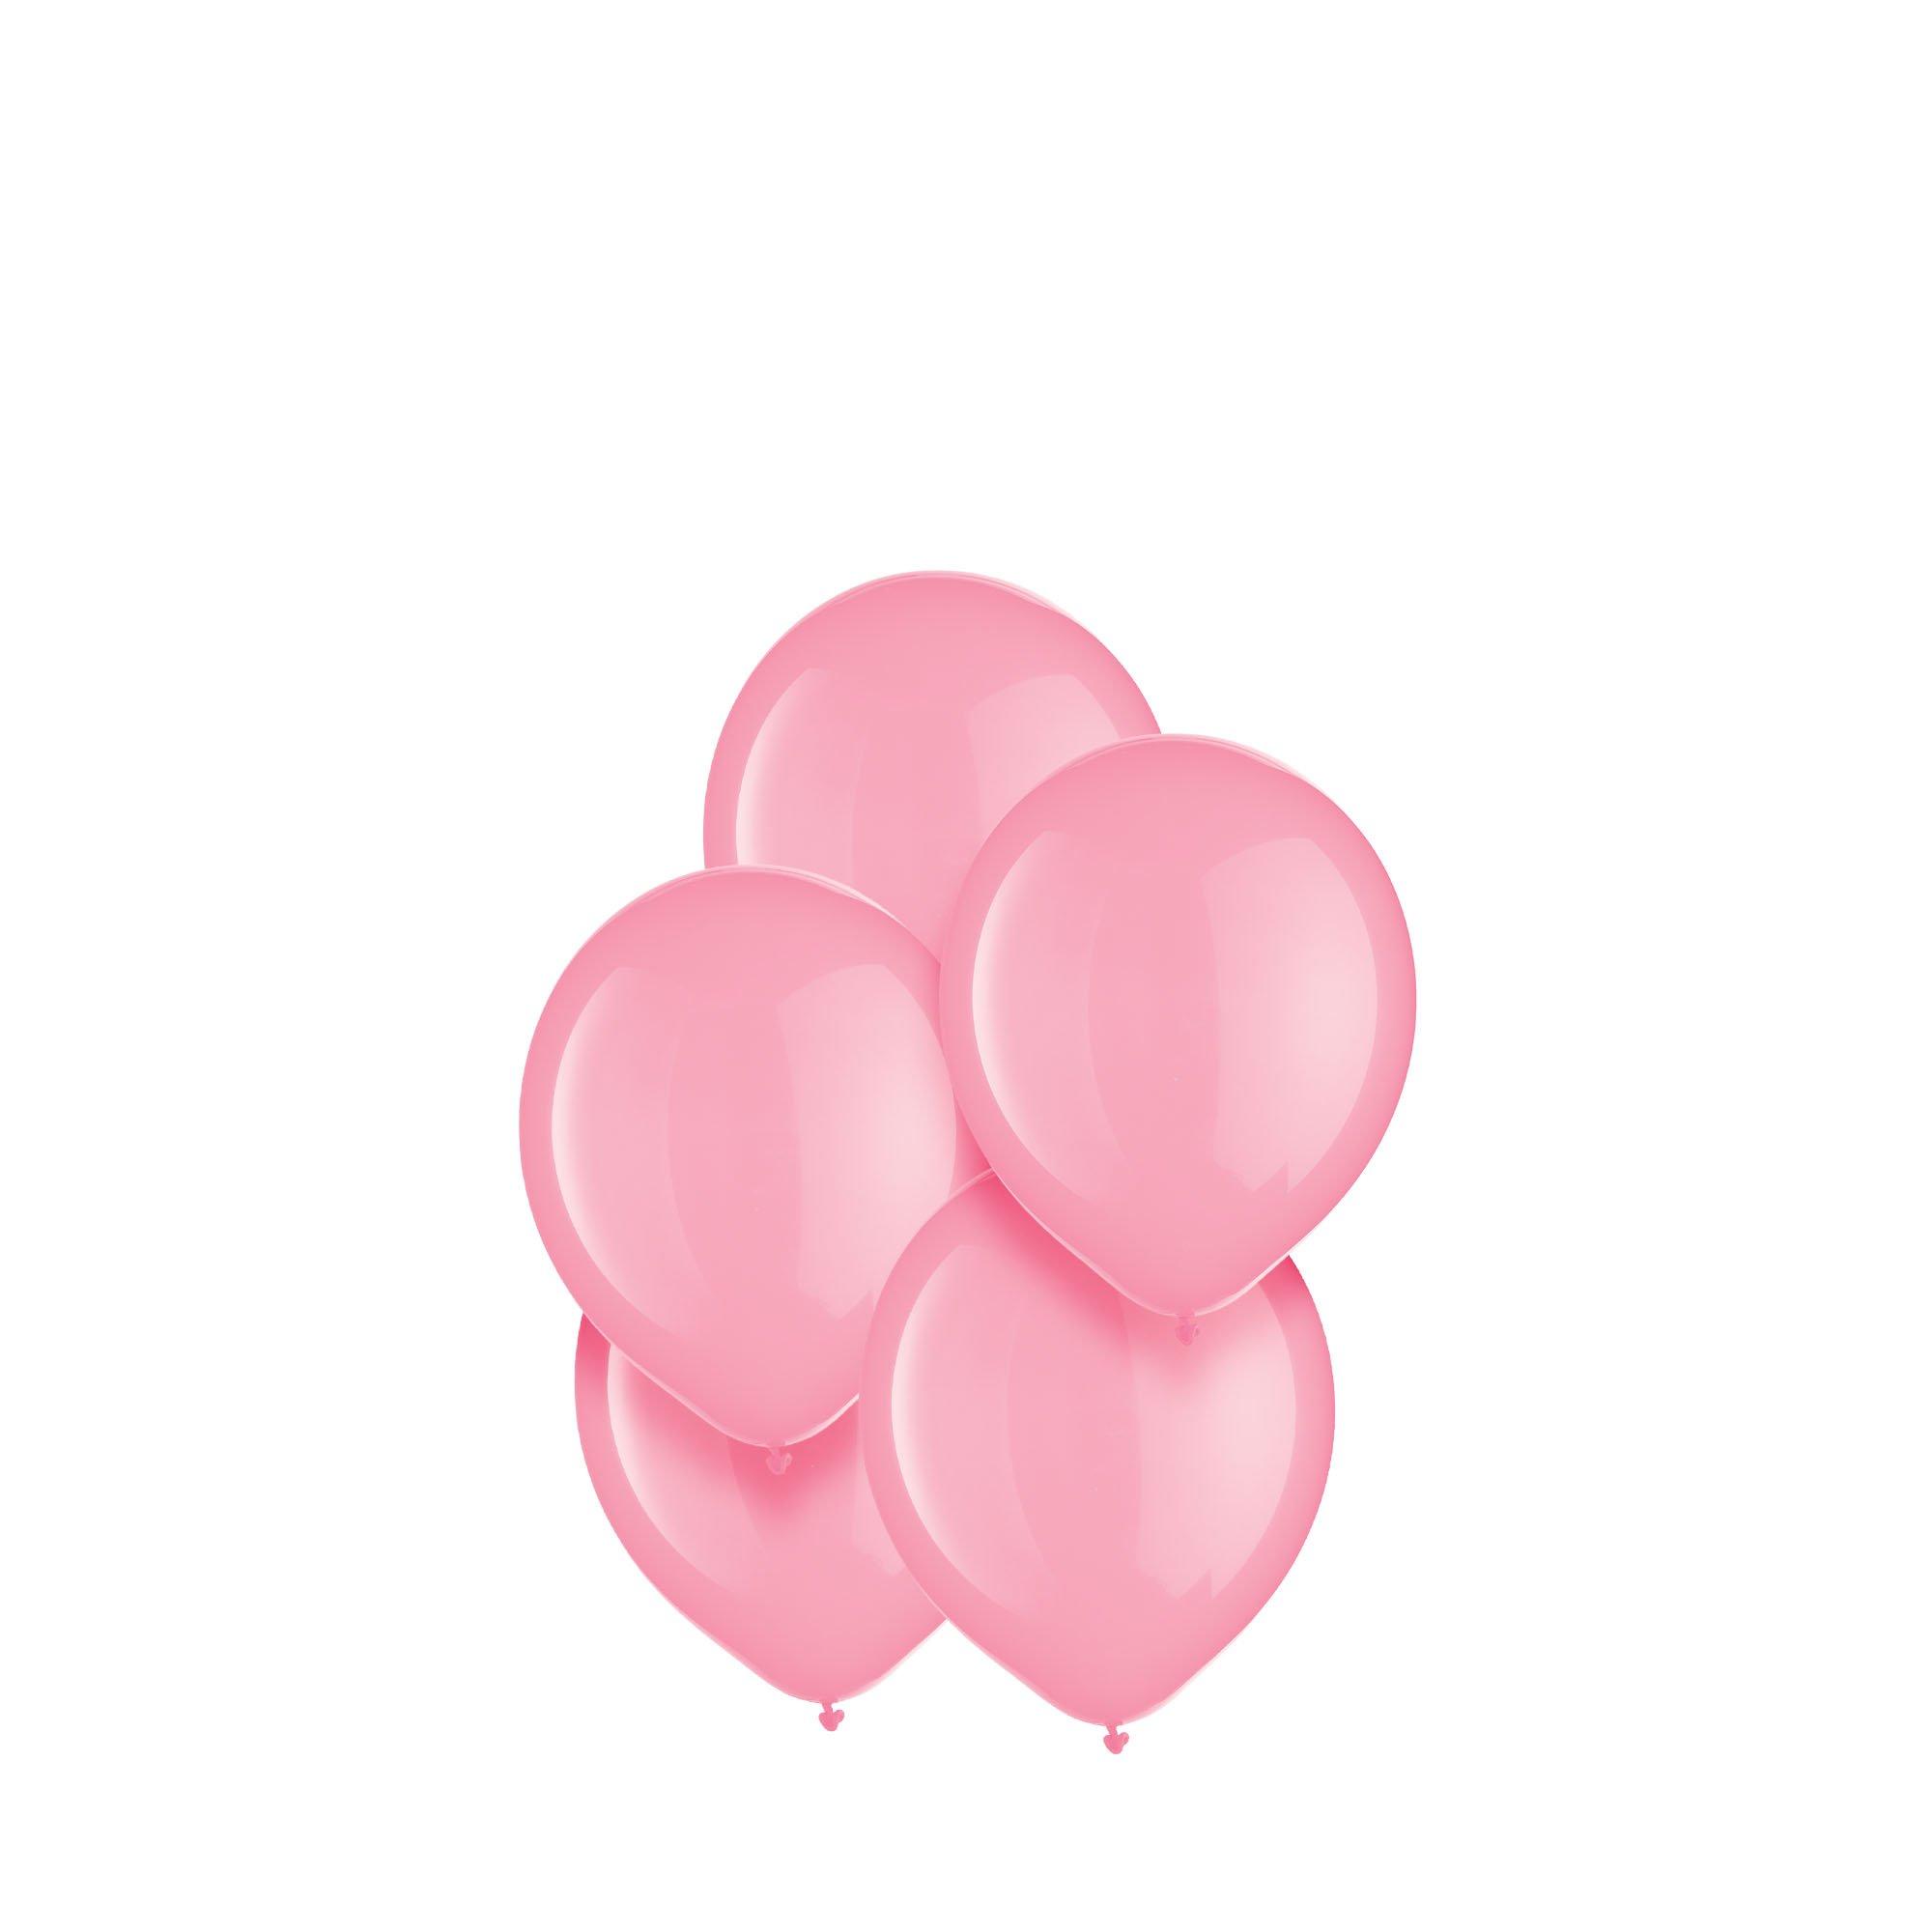 50ct, 5in, Pink Mini Balloons |